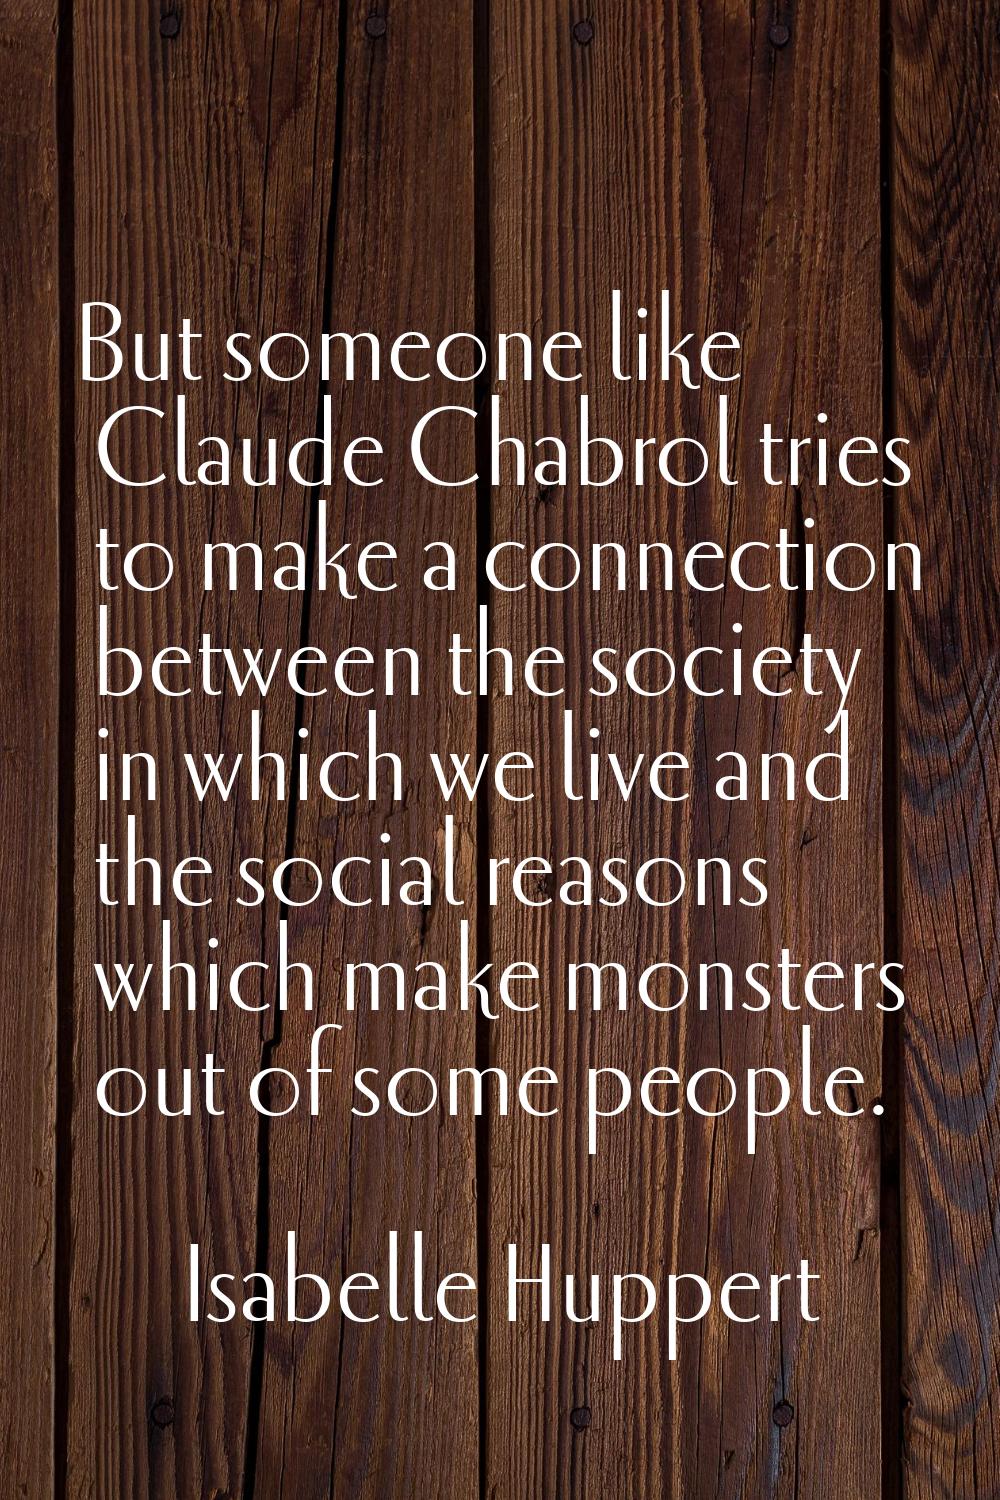 But someone like Claude Chabrol tries to make a connection between the society in which we live and